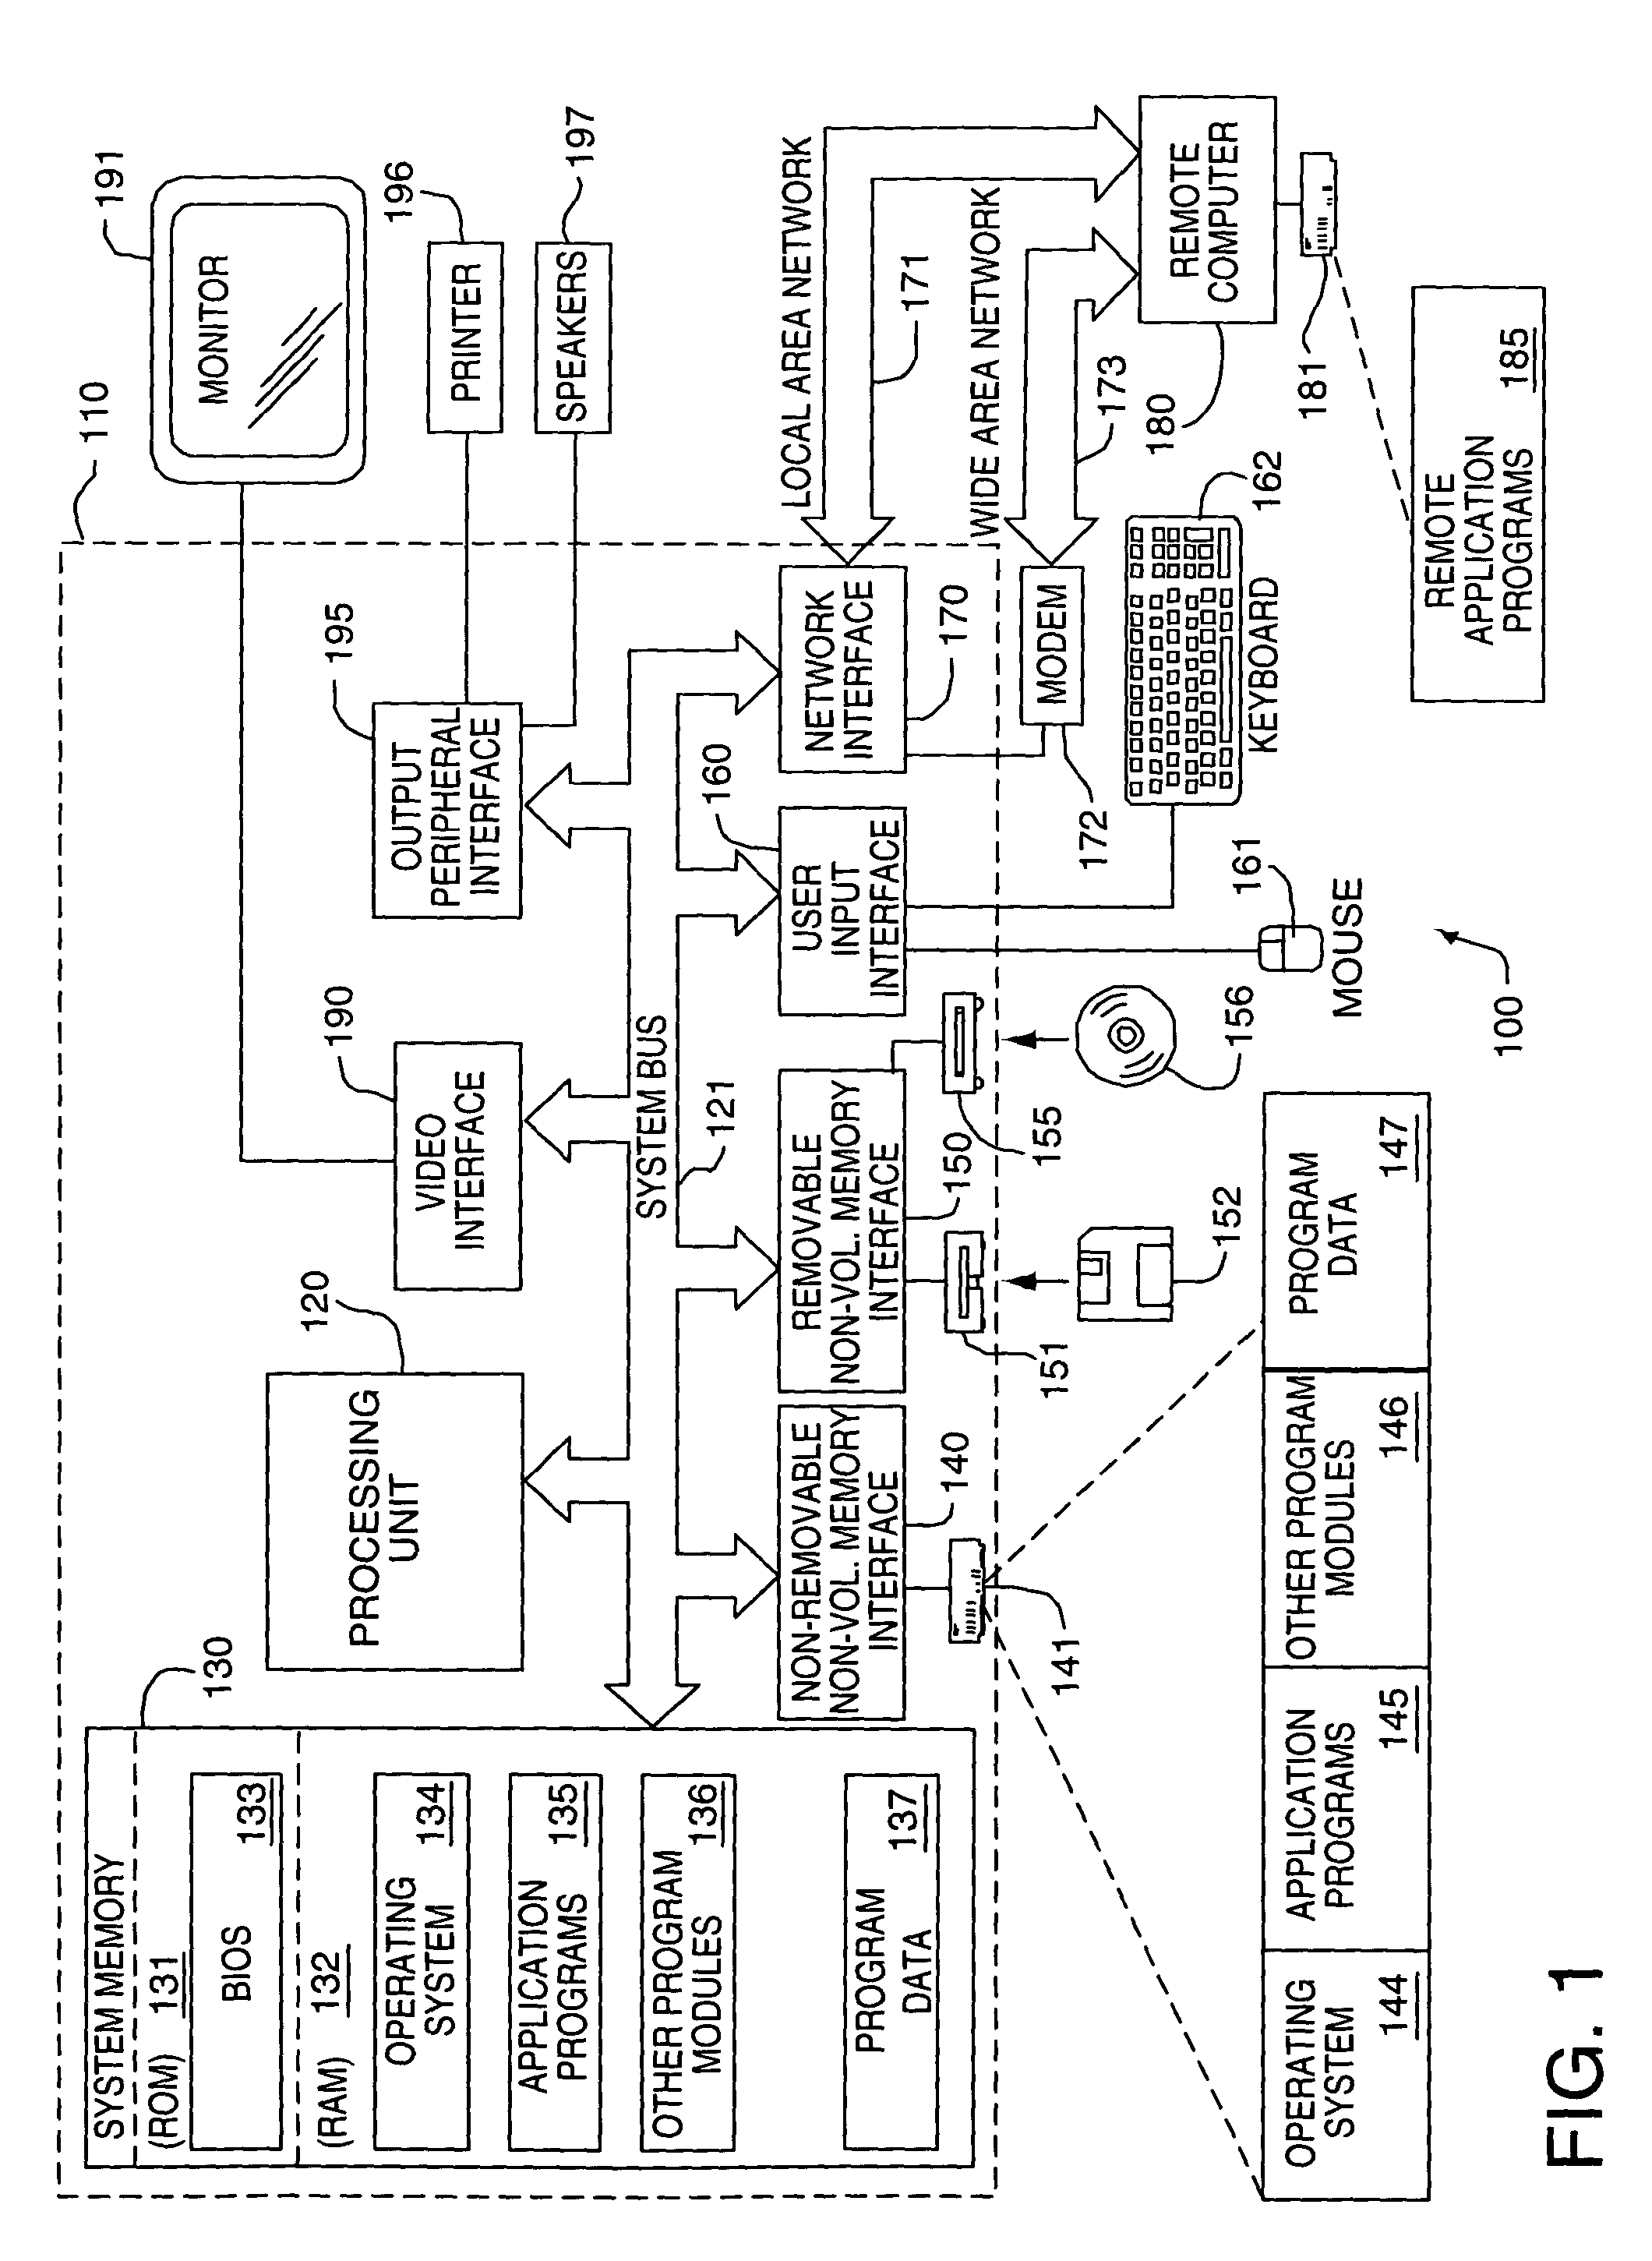 System and method for providing rich minimized applications